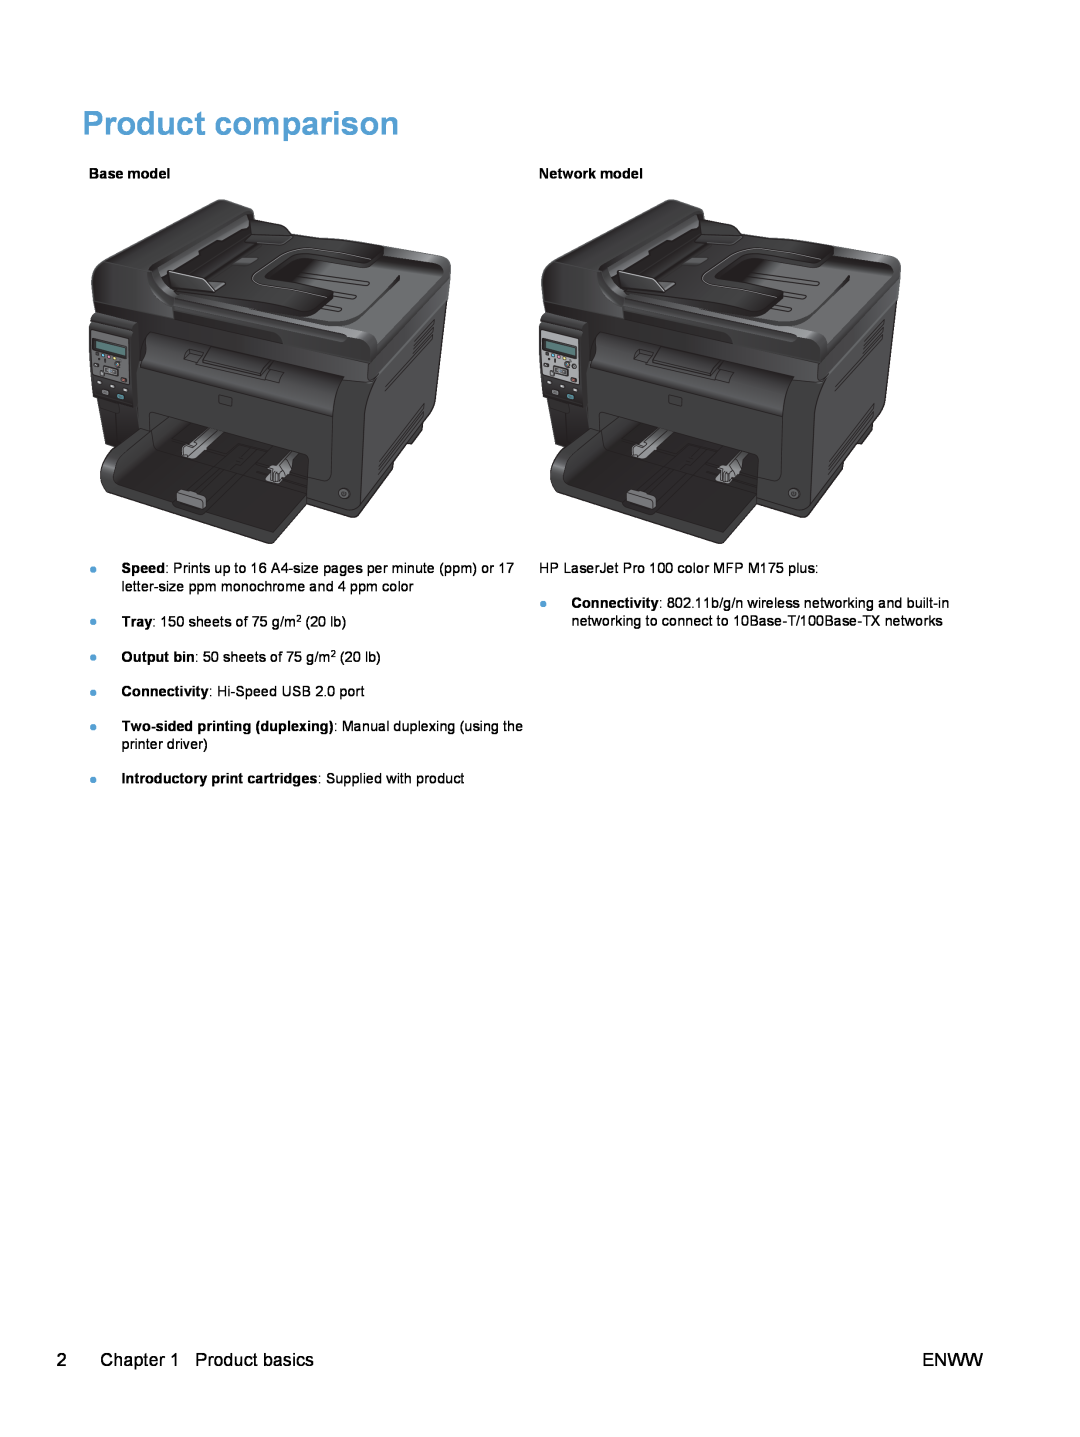 HP 100 COLOR MFP M175 Product comparison, Base model, Introductory print cartridges Supplied with product, Network model 